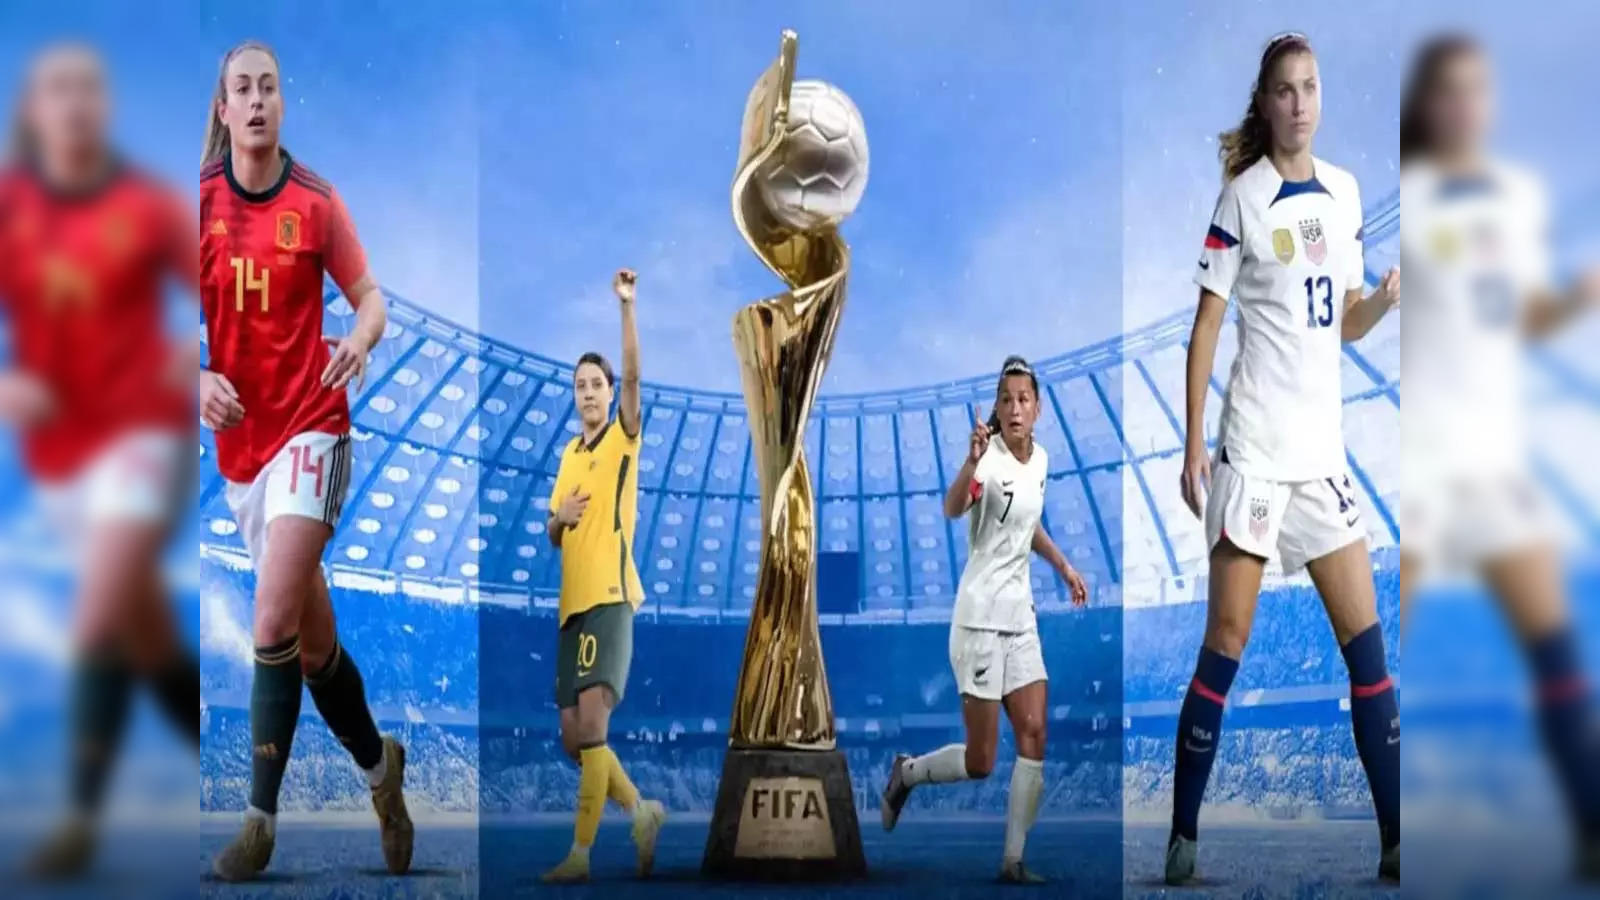 How to Watch 2022 World Cup Online Free: Live Stream Soccer